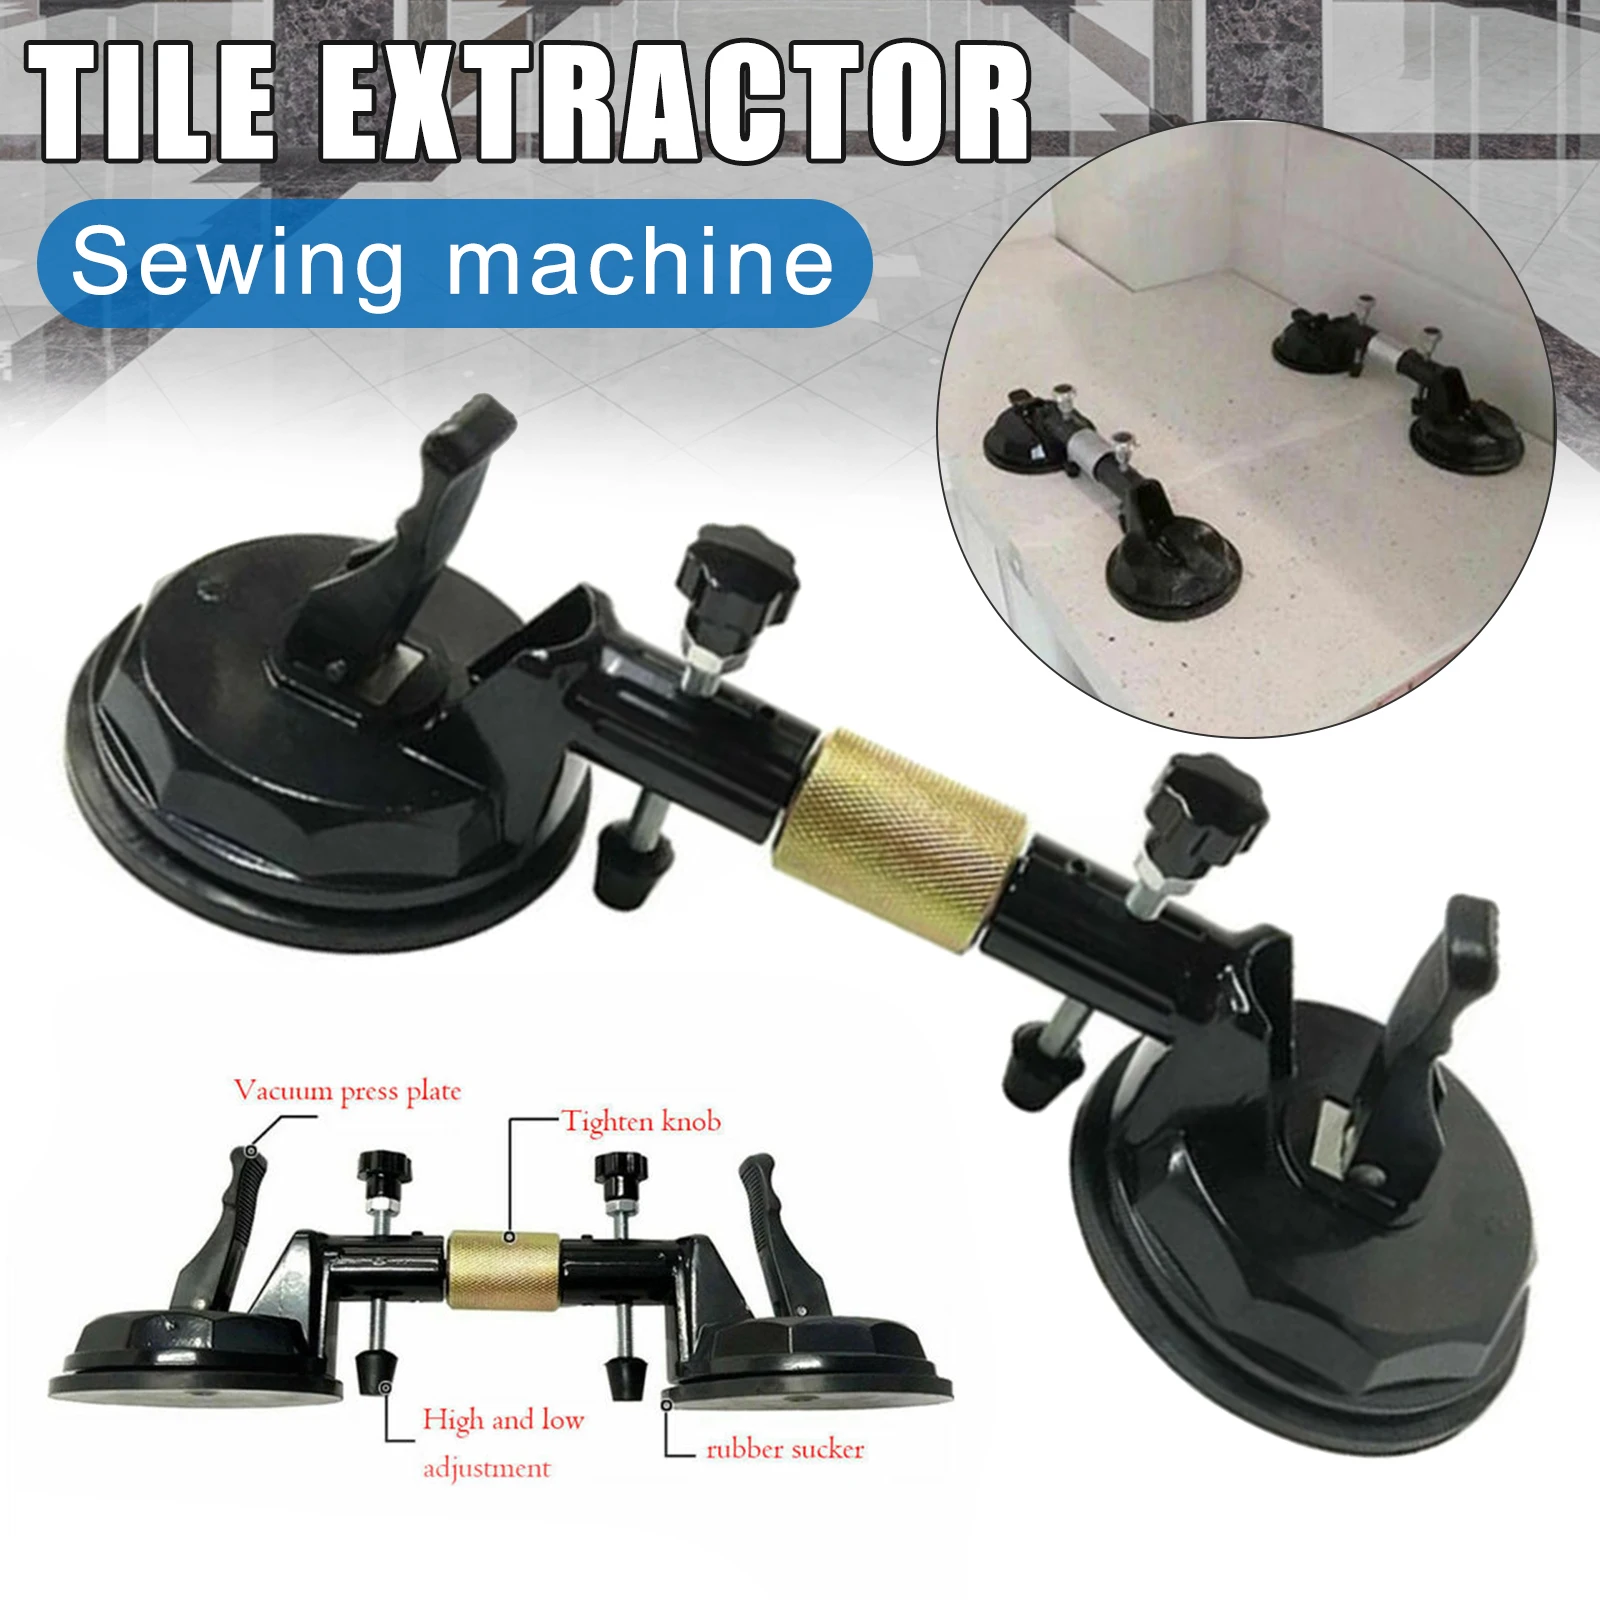 Hot Adjustable Suction Cup Stone Seam Setter for Pulling and Aligning Tiles Flat Surfaces Construction Tools Accessories